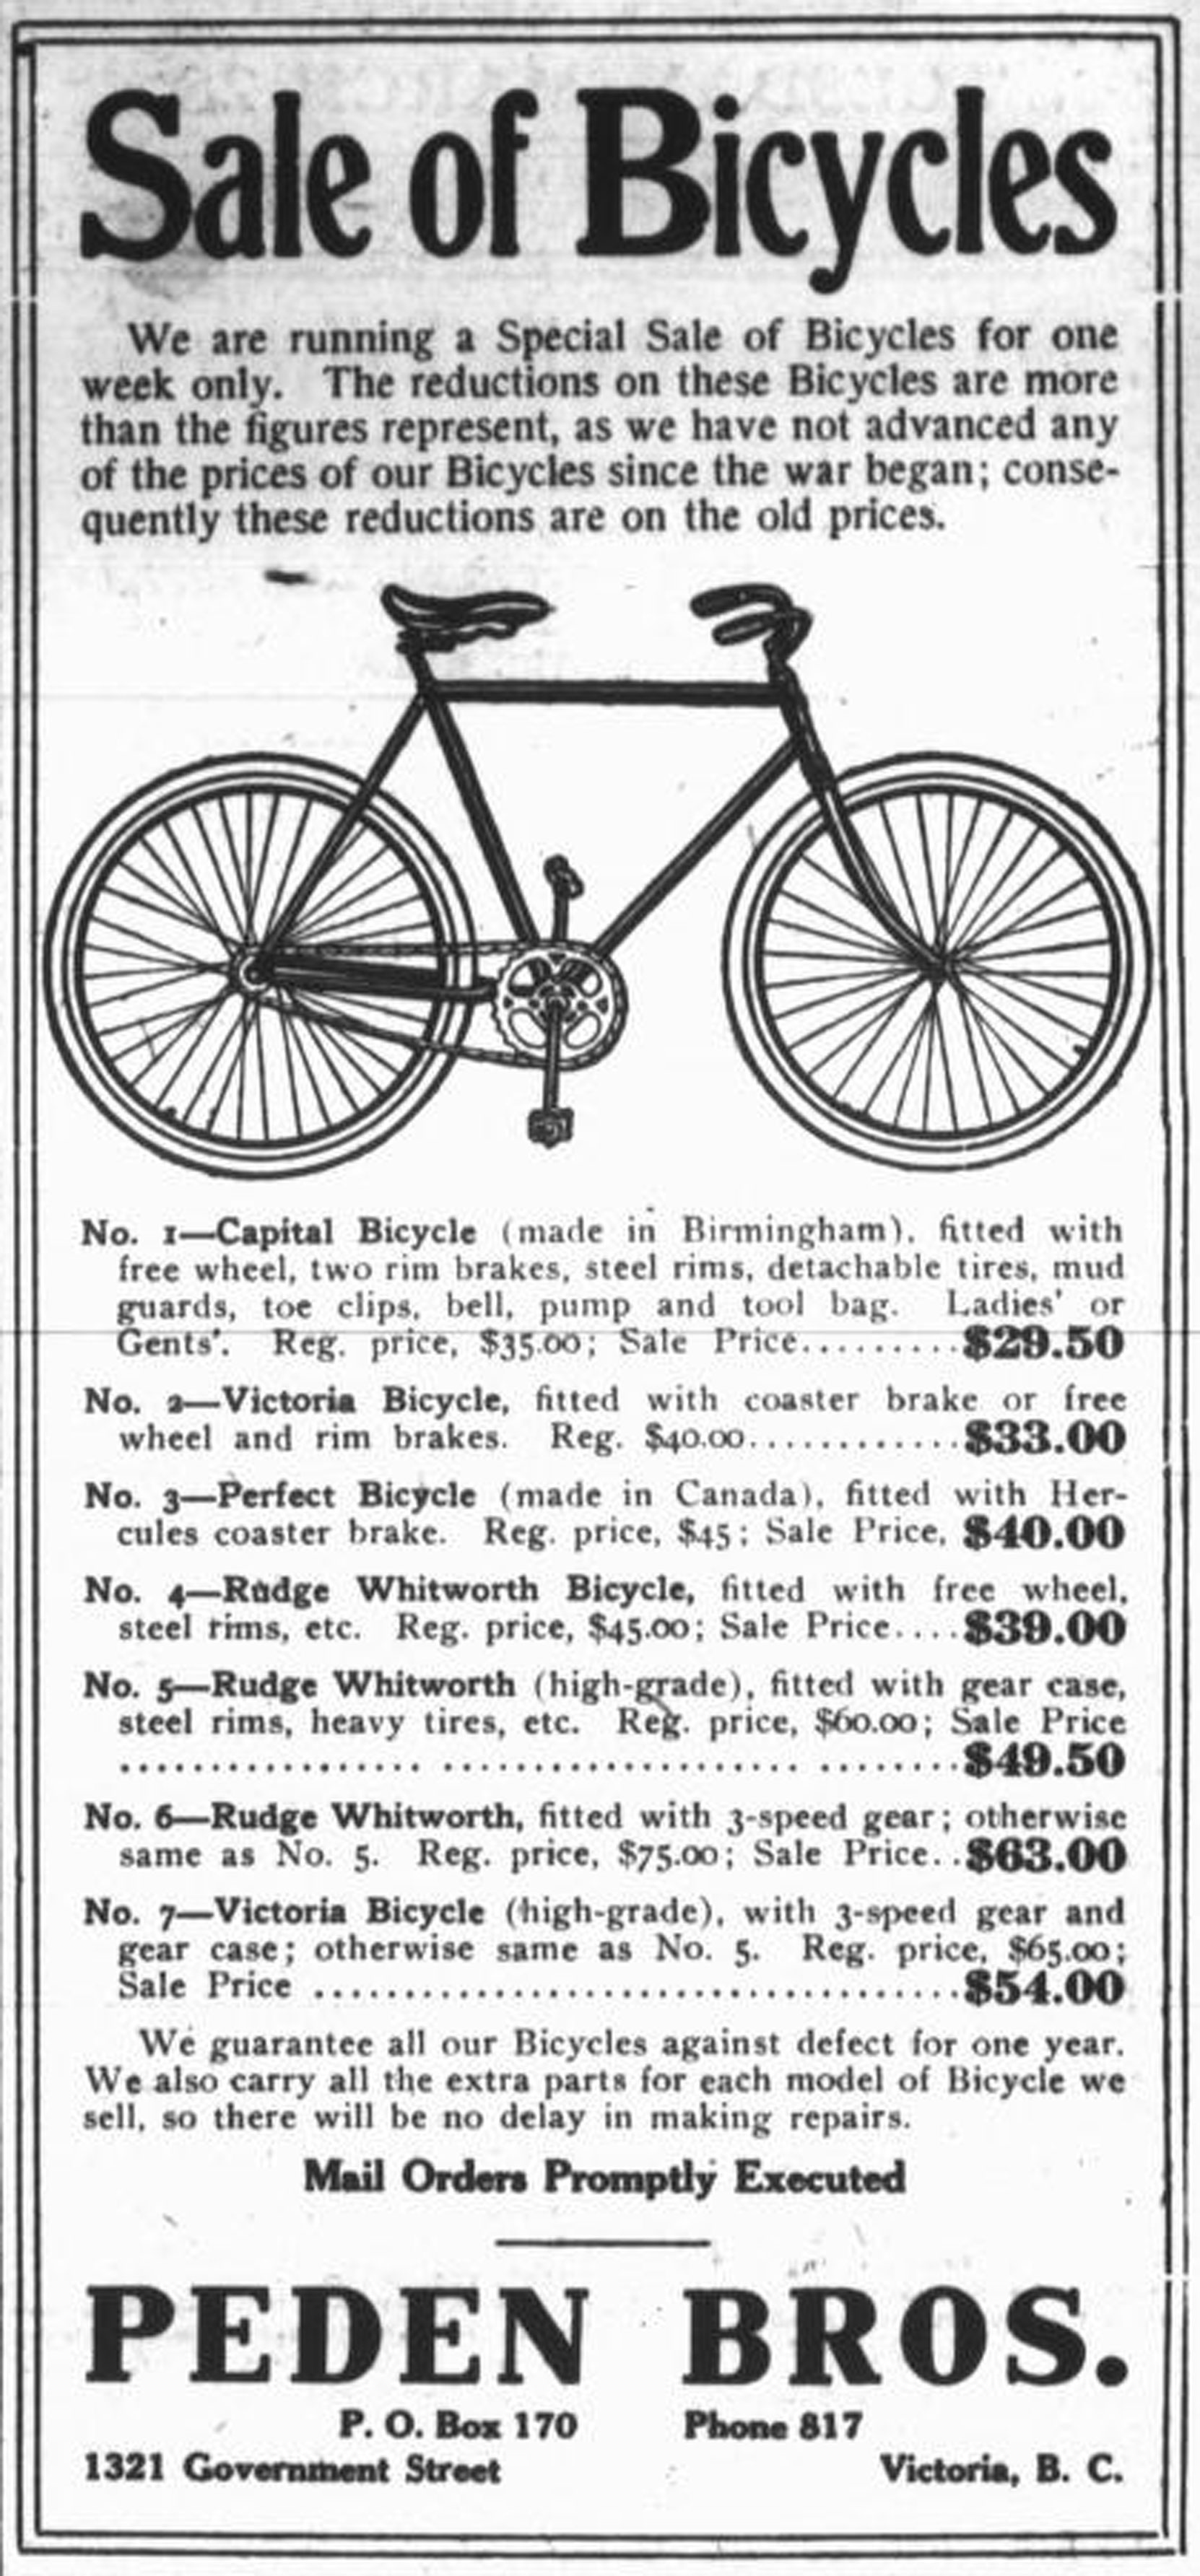 1916 advertisement for bicycles at Peden Brothers, 1321 Government Street (Victoria Online Sightseeing Tours collection)